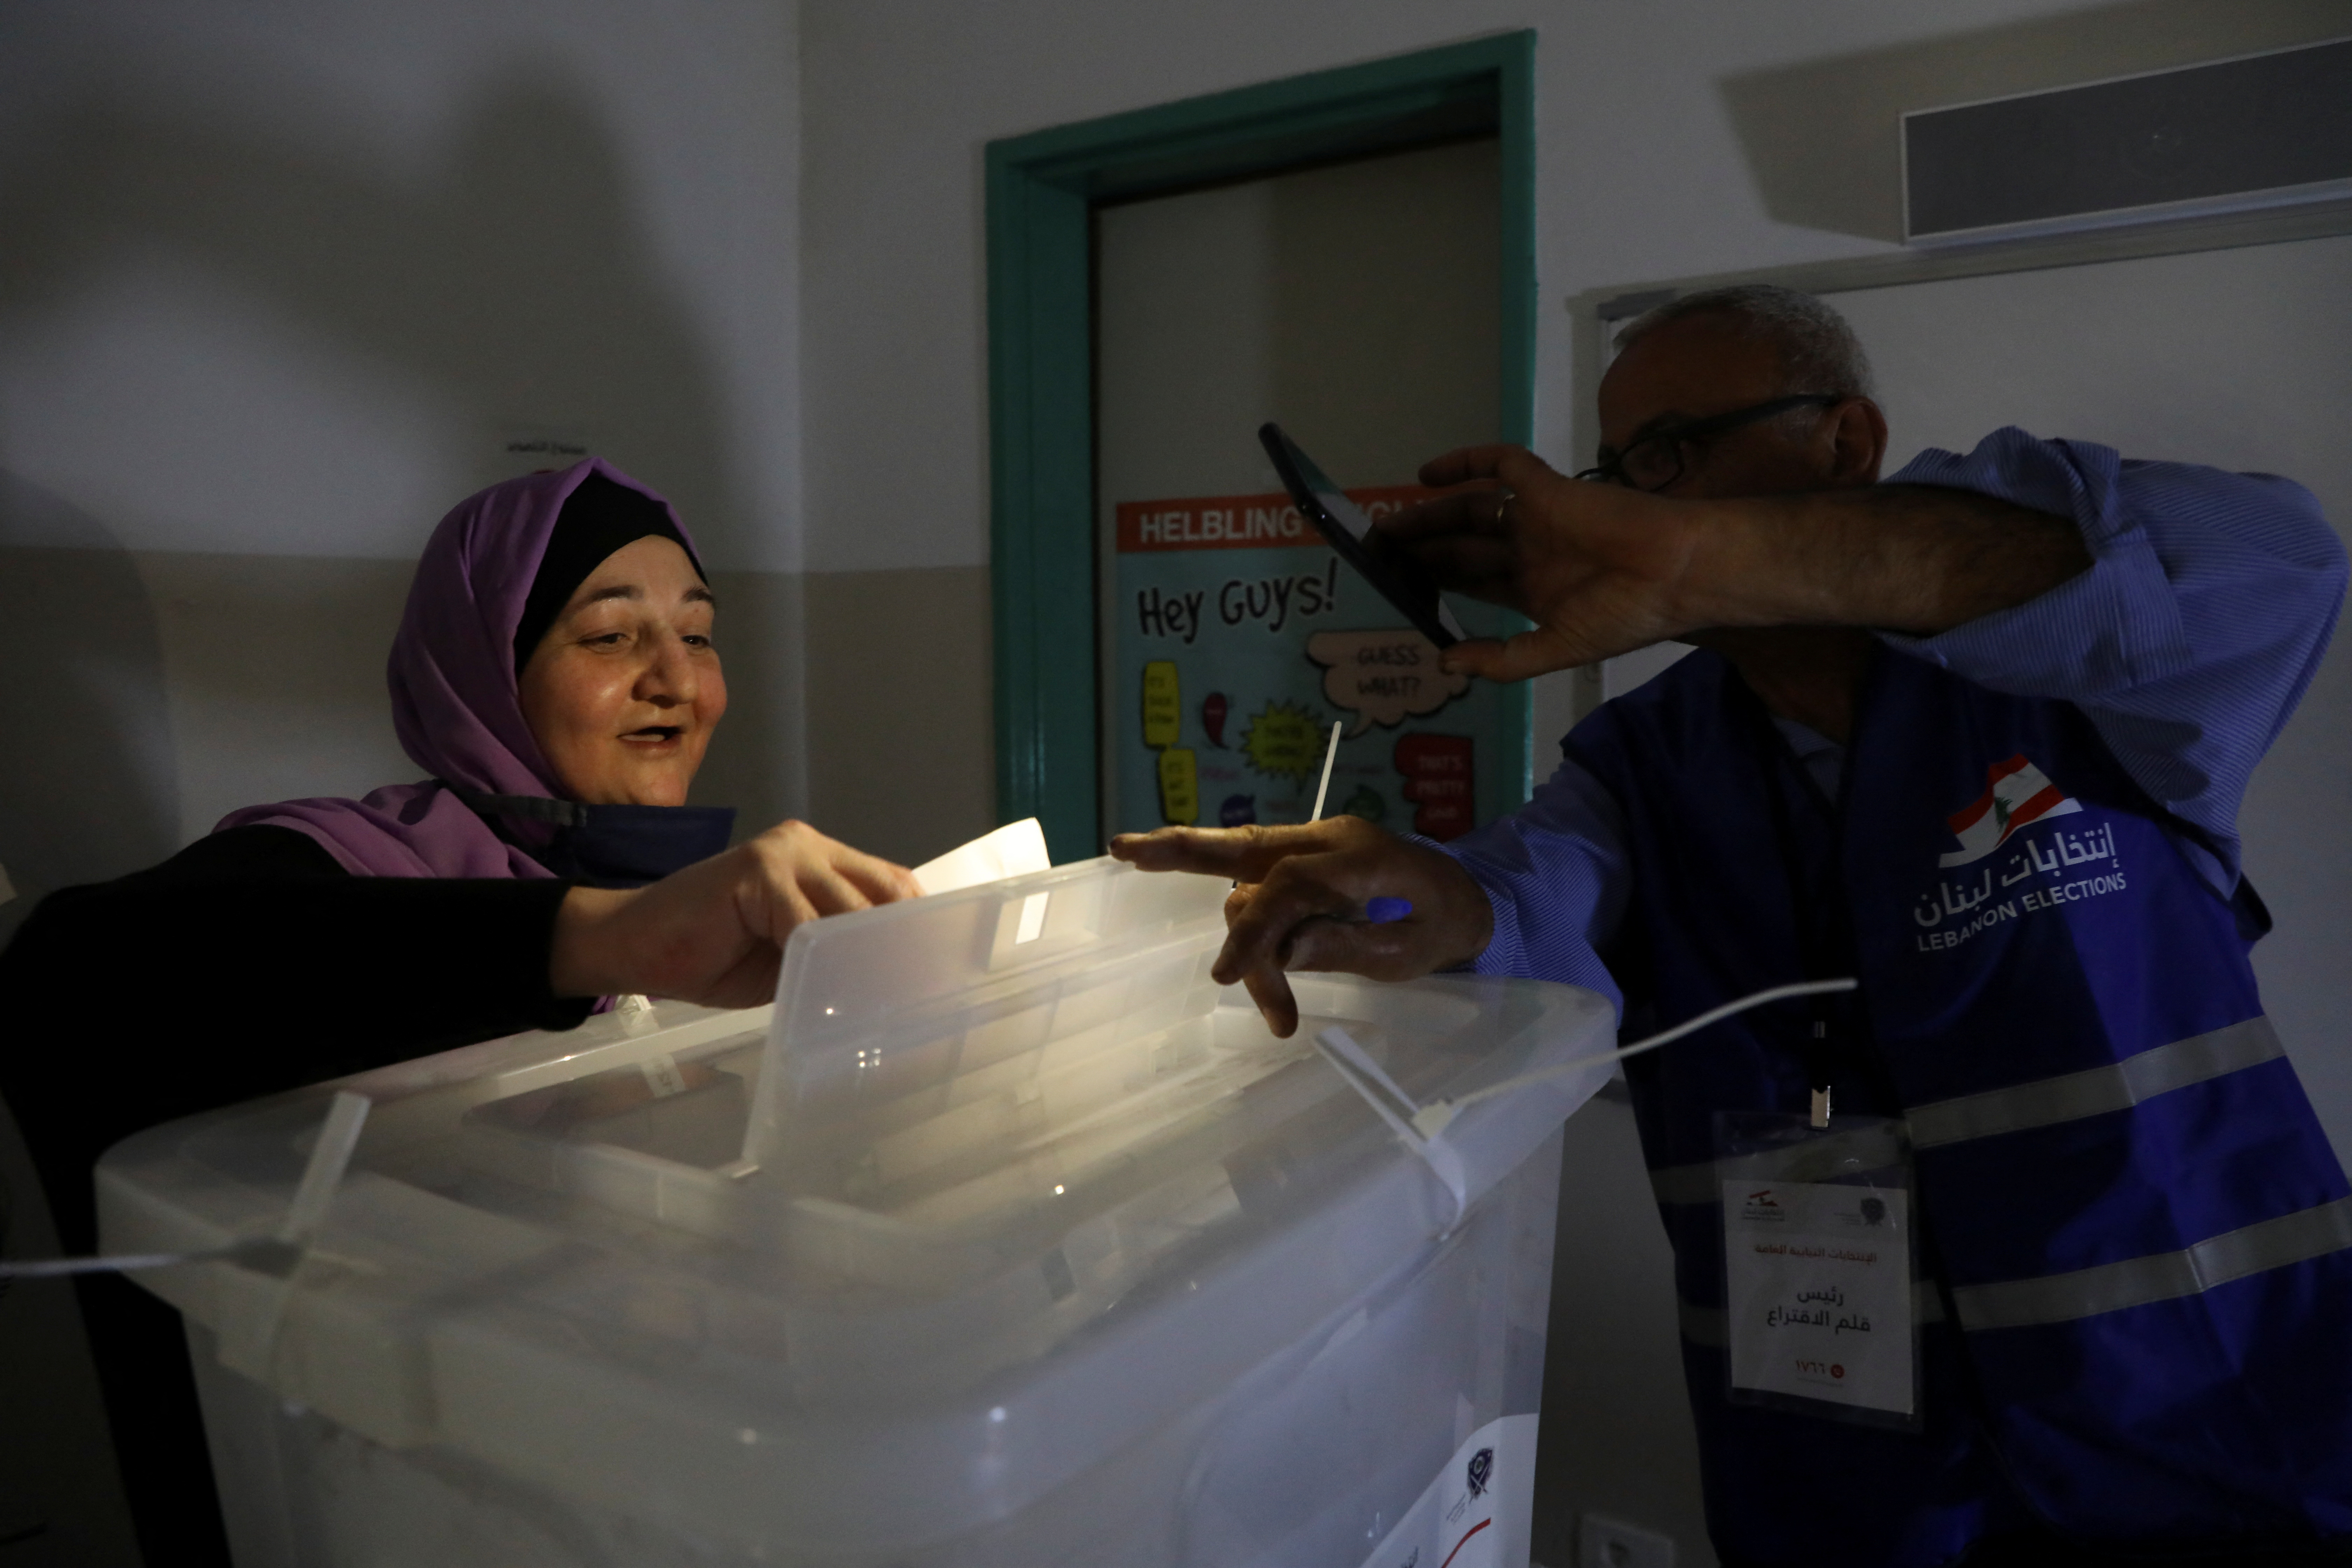 A woman casts her vote at a polling station during a power cut in Lebanon's parliamentary election, in Beirut